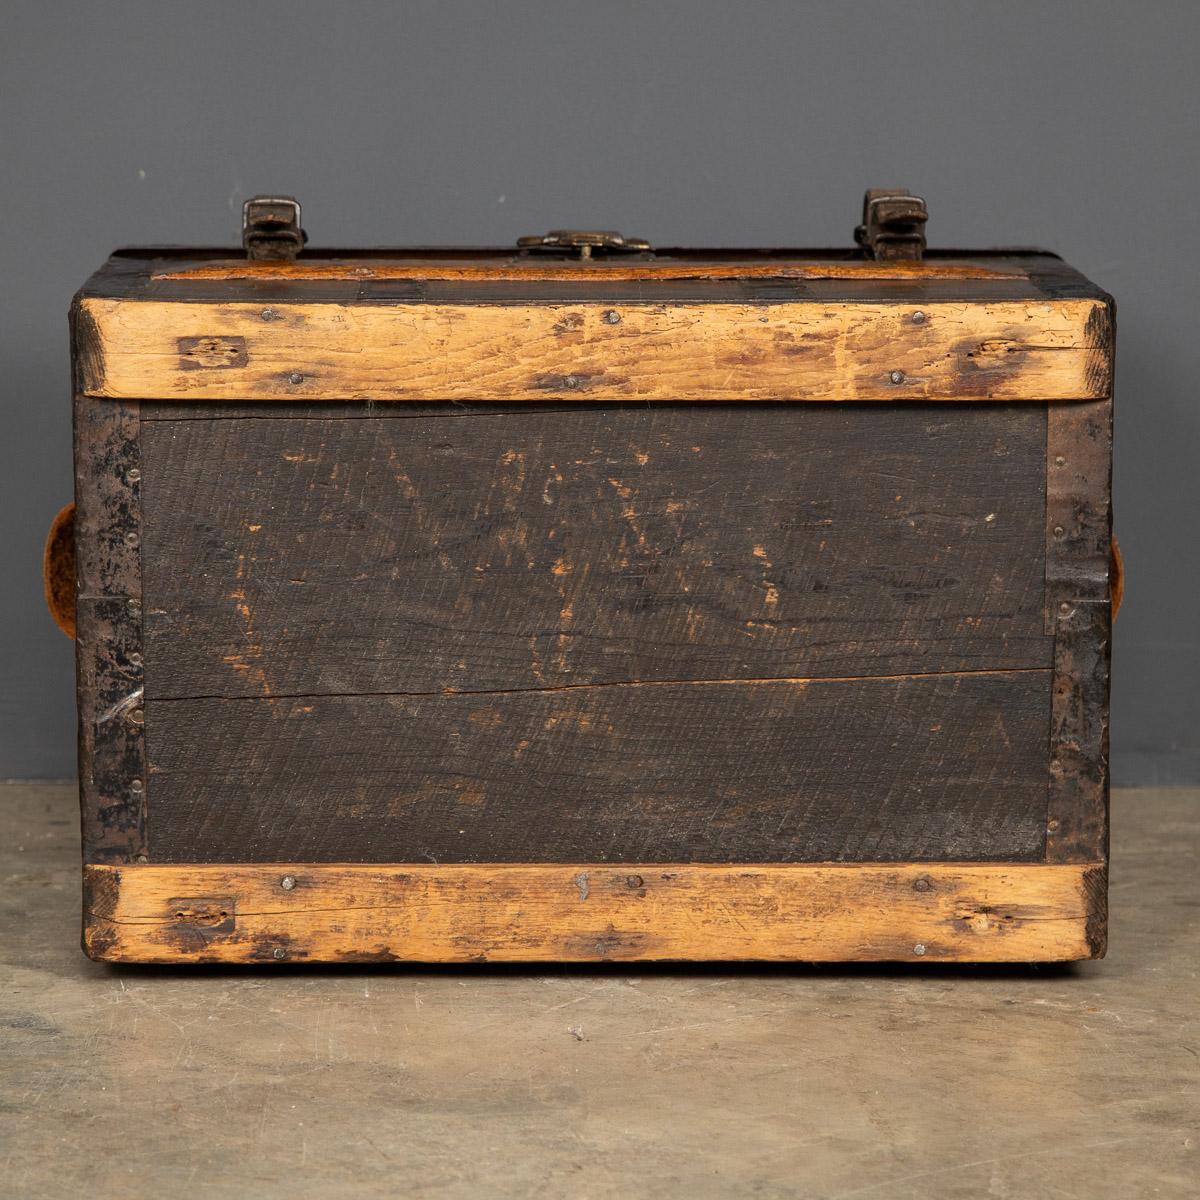 Steel 20th Century Childs Traveling Trunk, c.1900